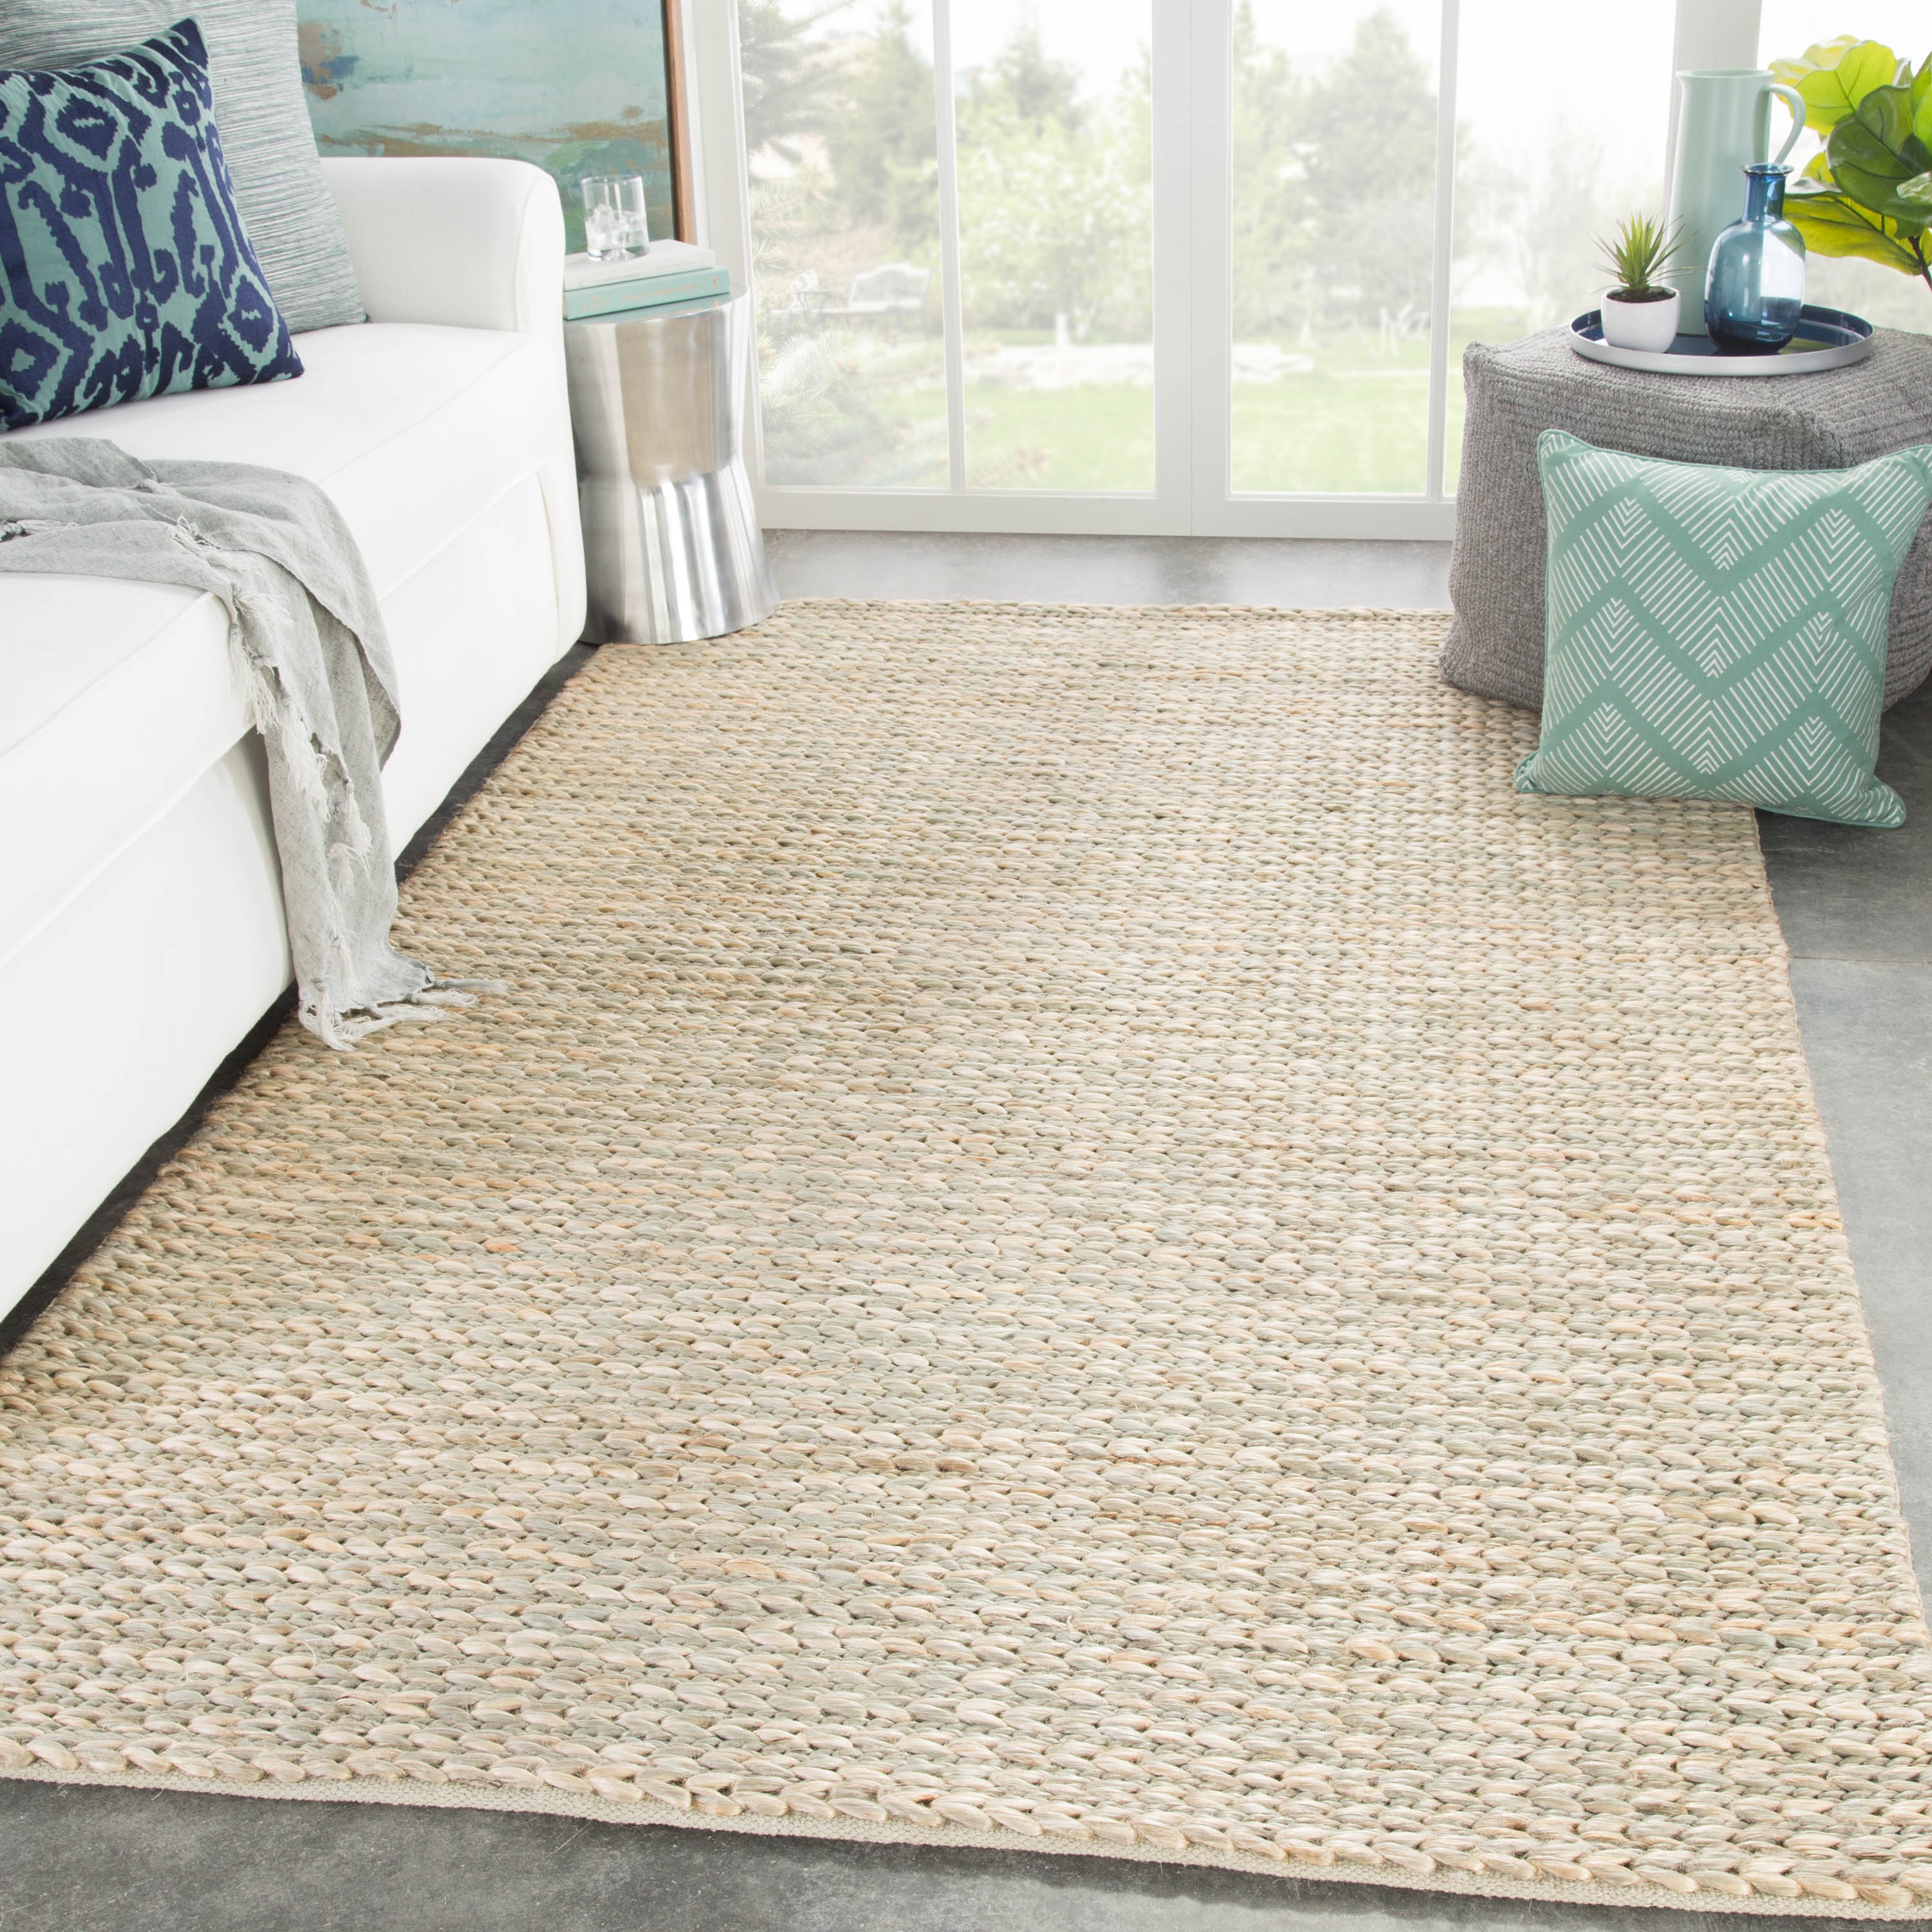 Calista Natural Solid Tan/ Greige Area Rug (8'X10') - Image 4